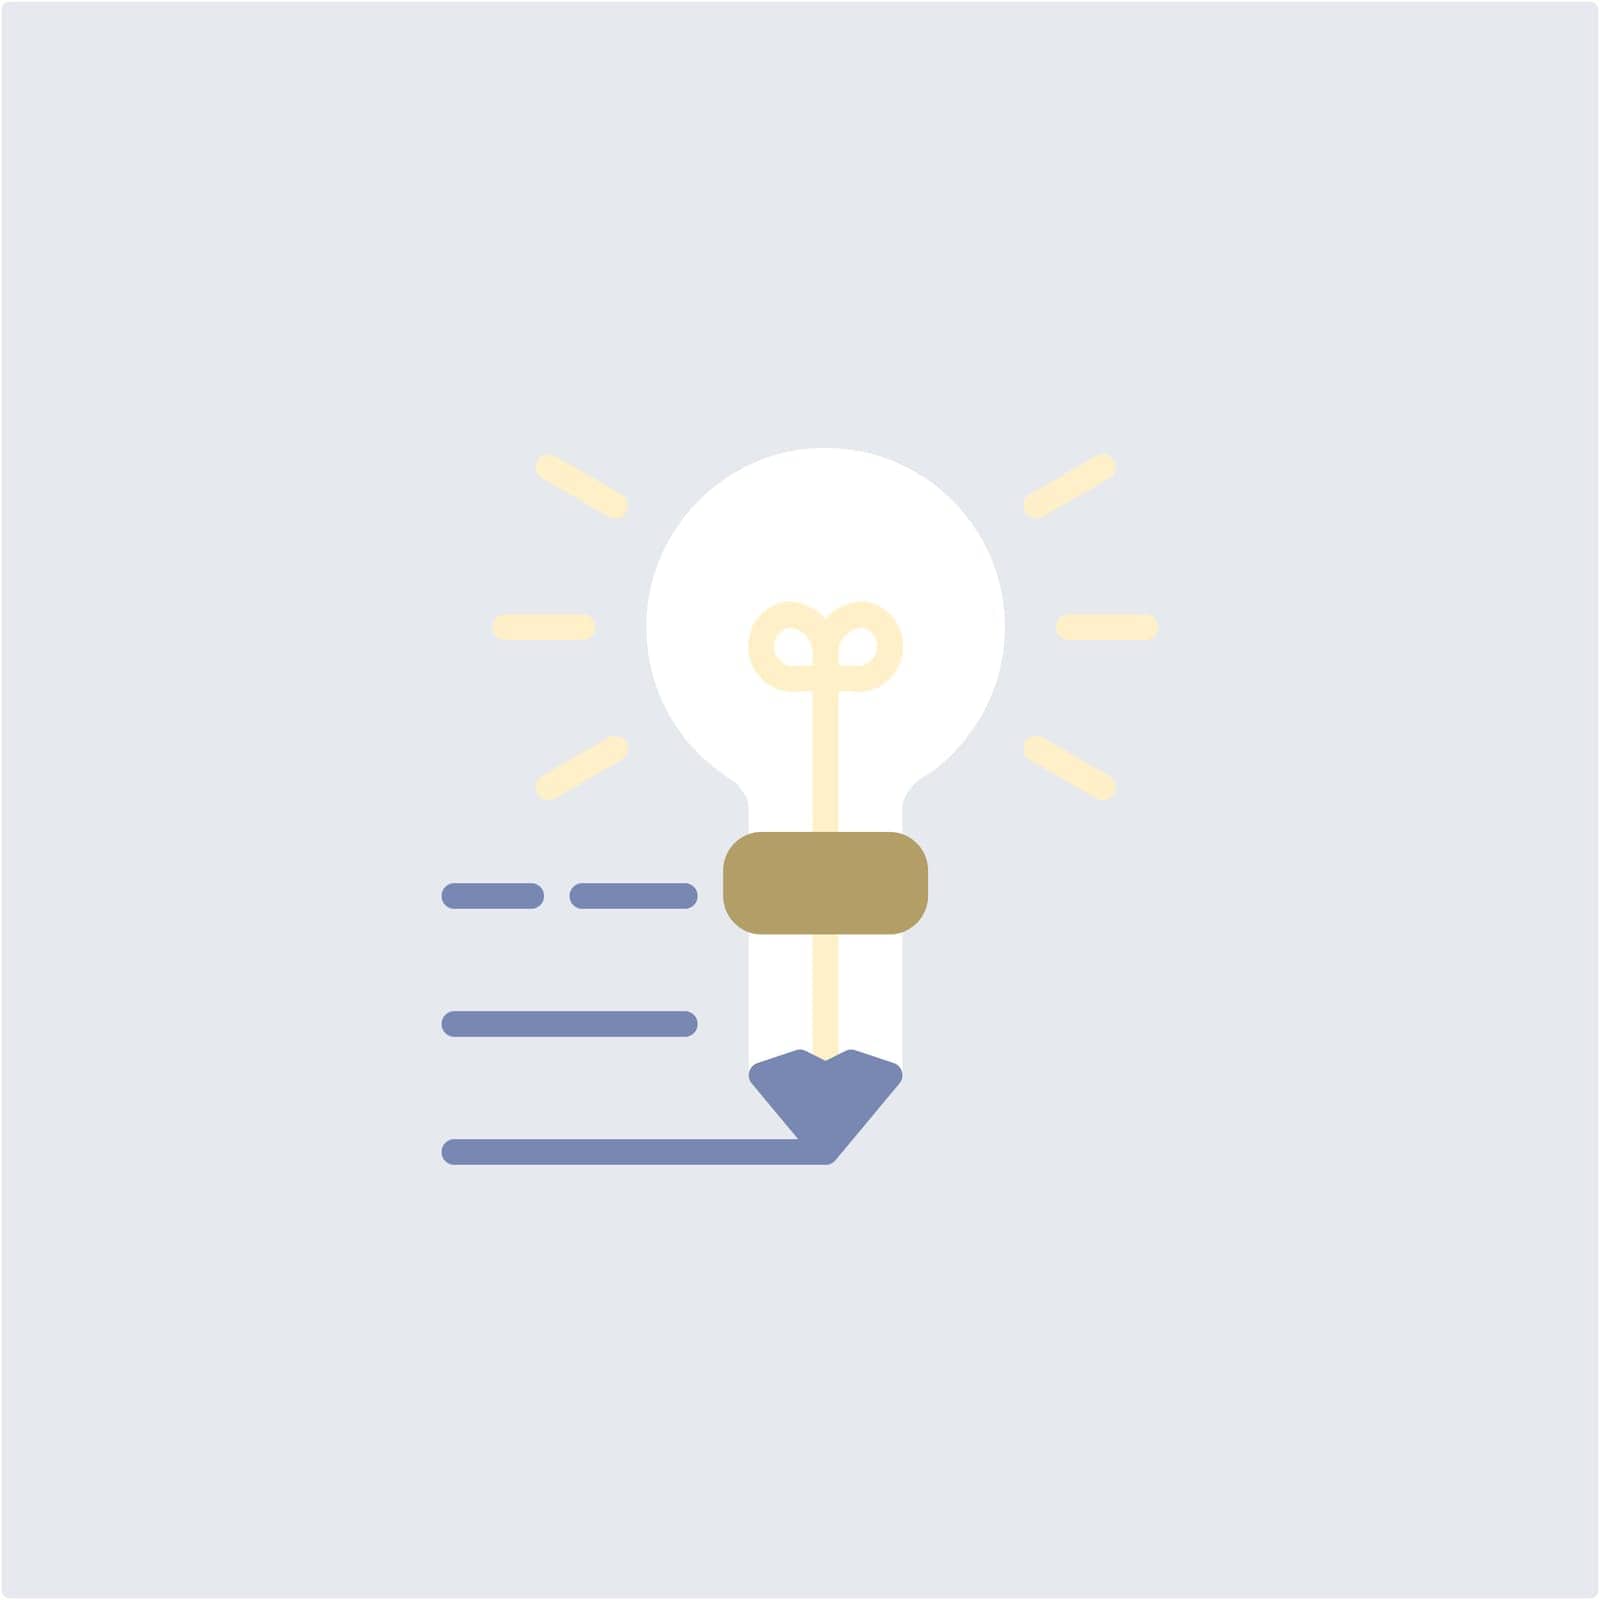 This icon is suitable for representing creative ideas or inspiration in the design or product development process.